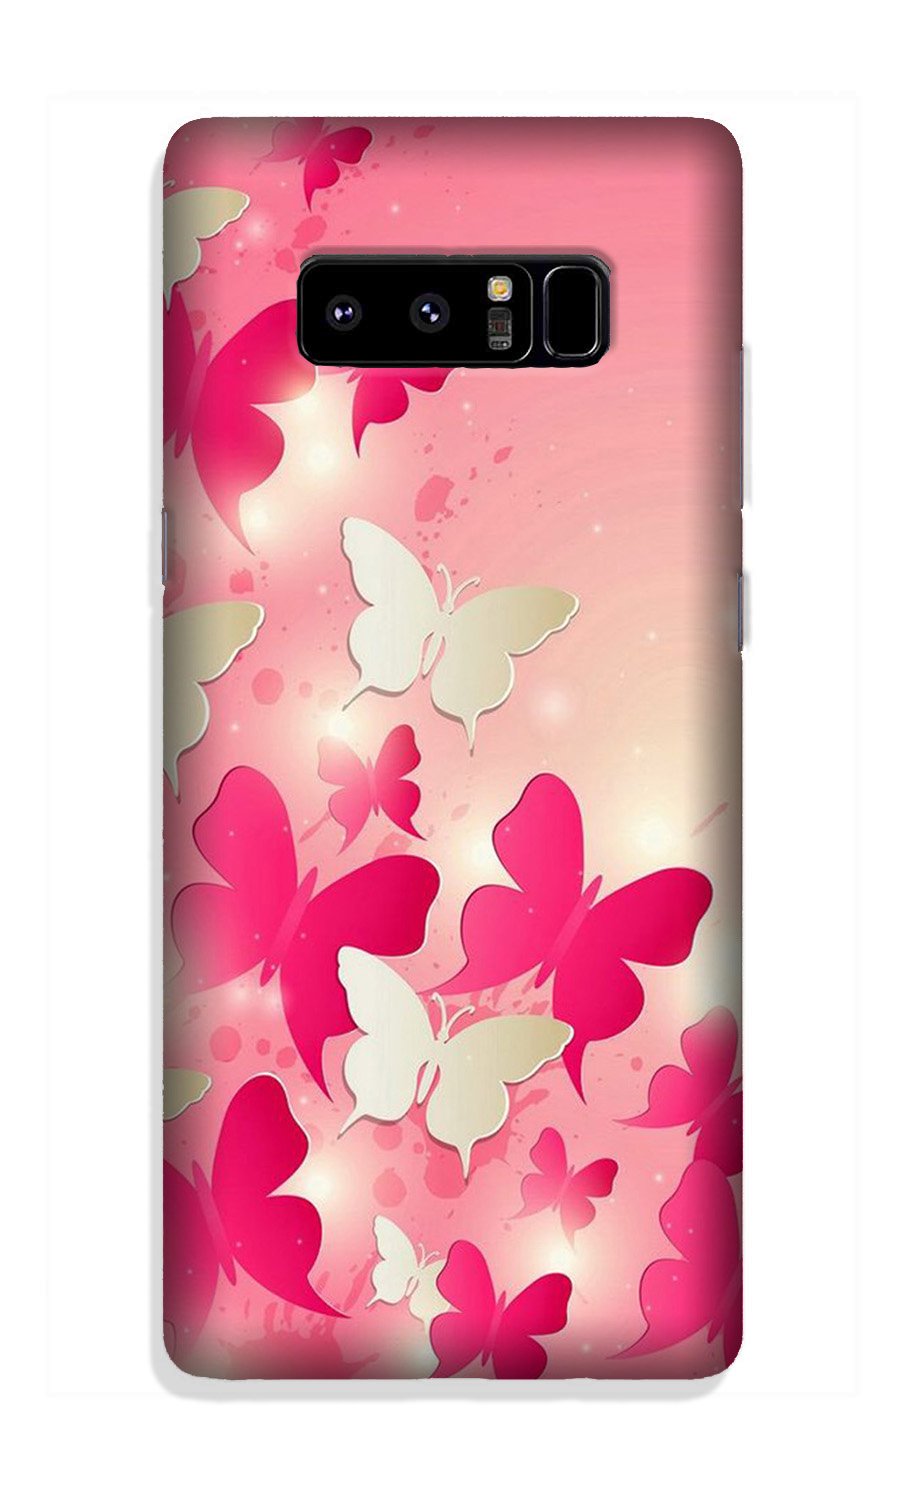 White Pick Butterflies Case for Galaxy Note 8